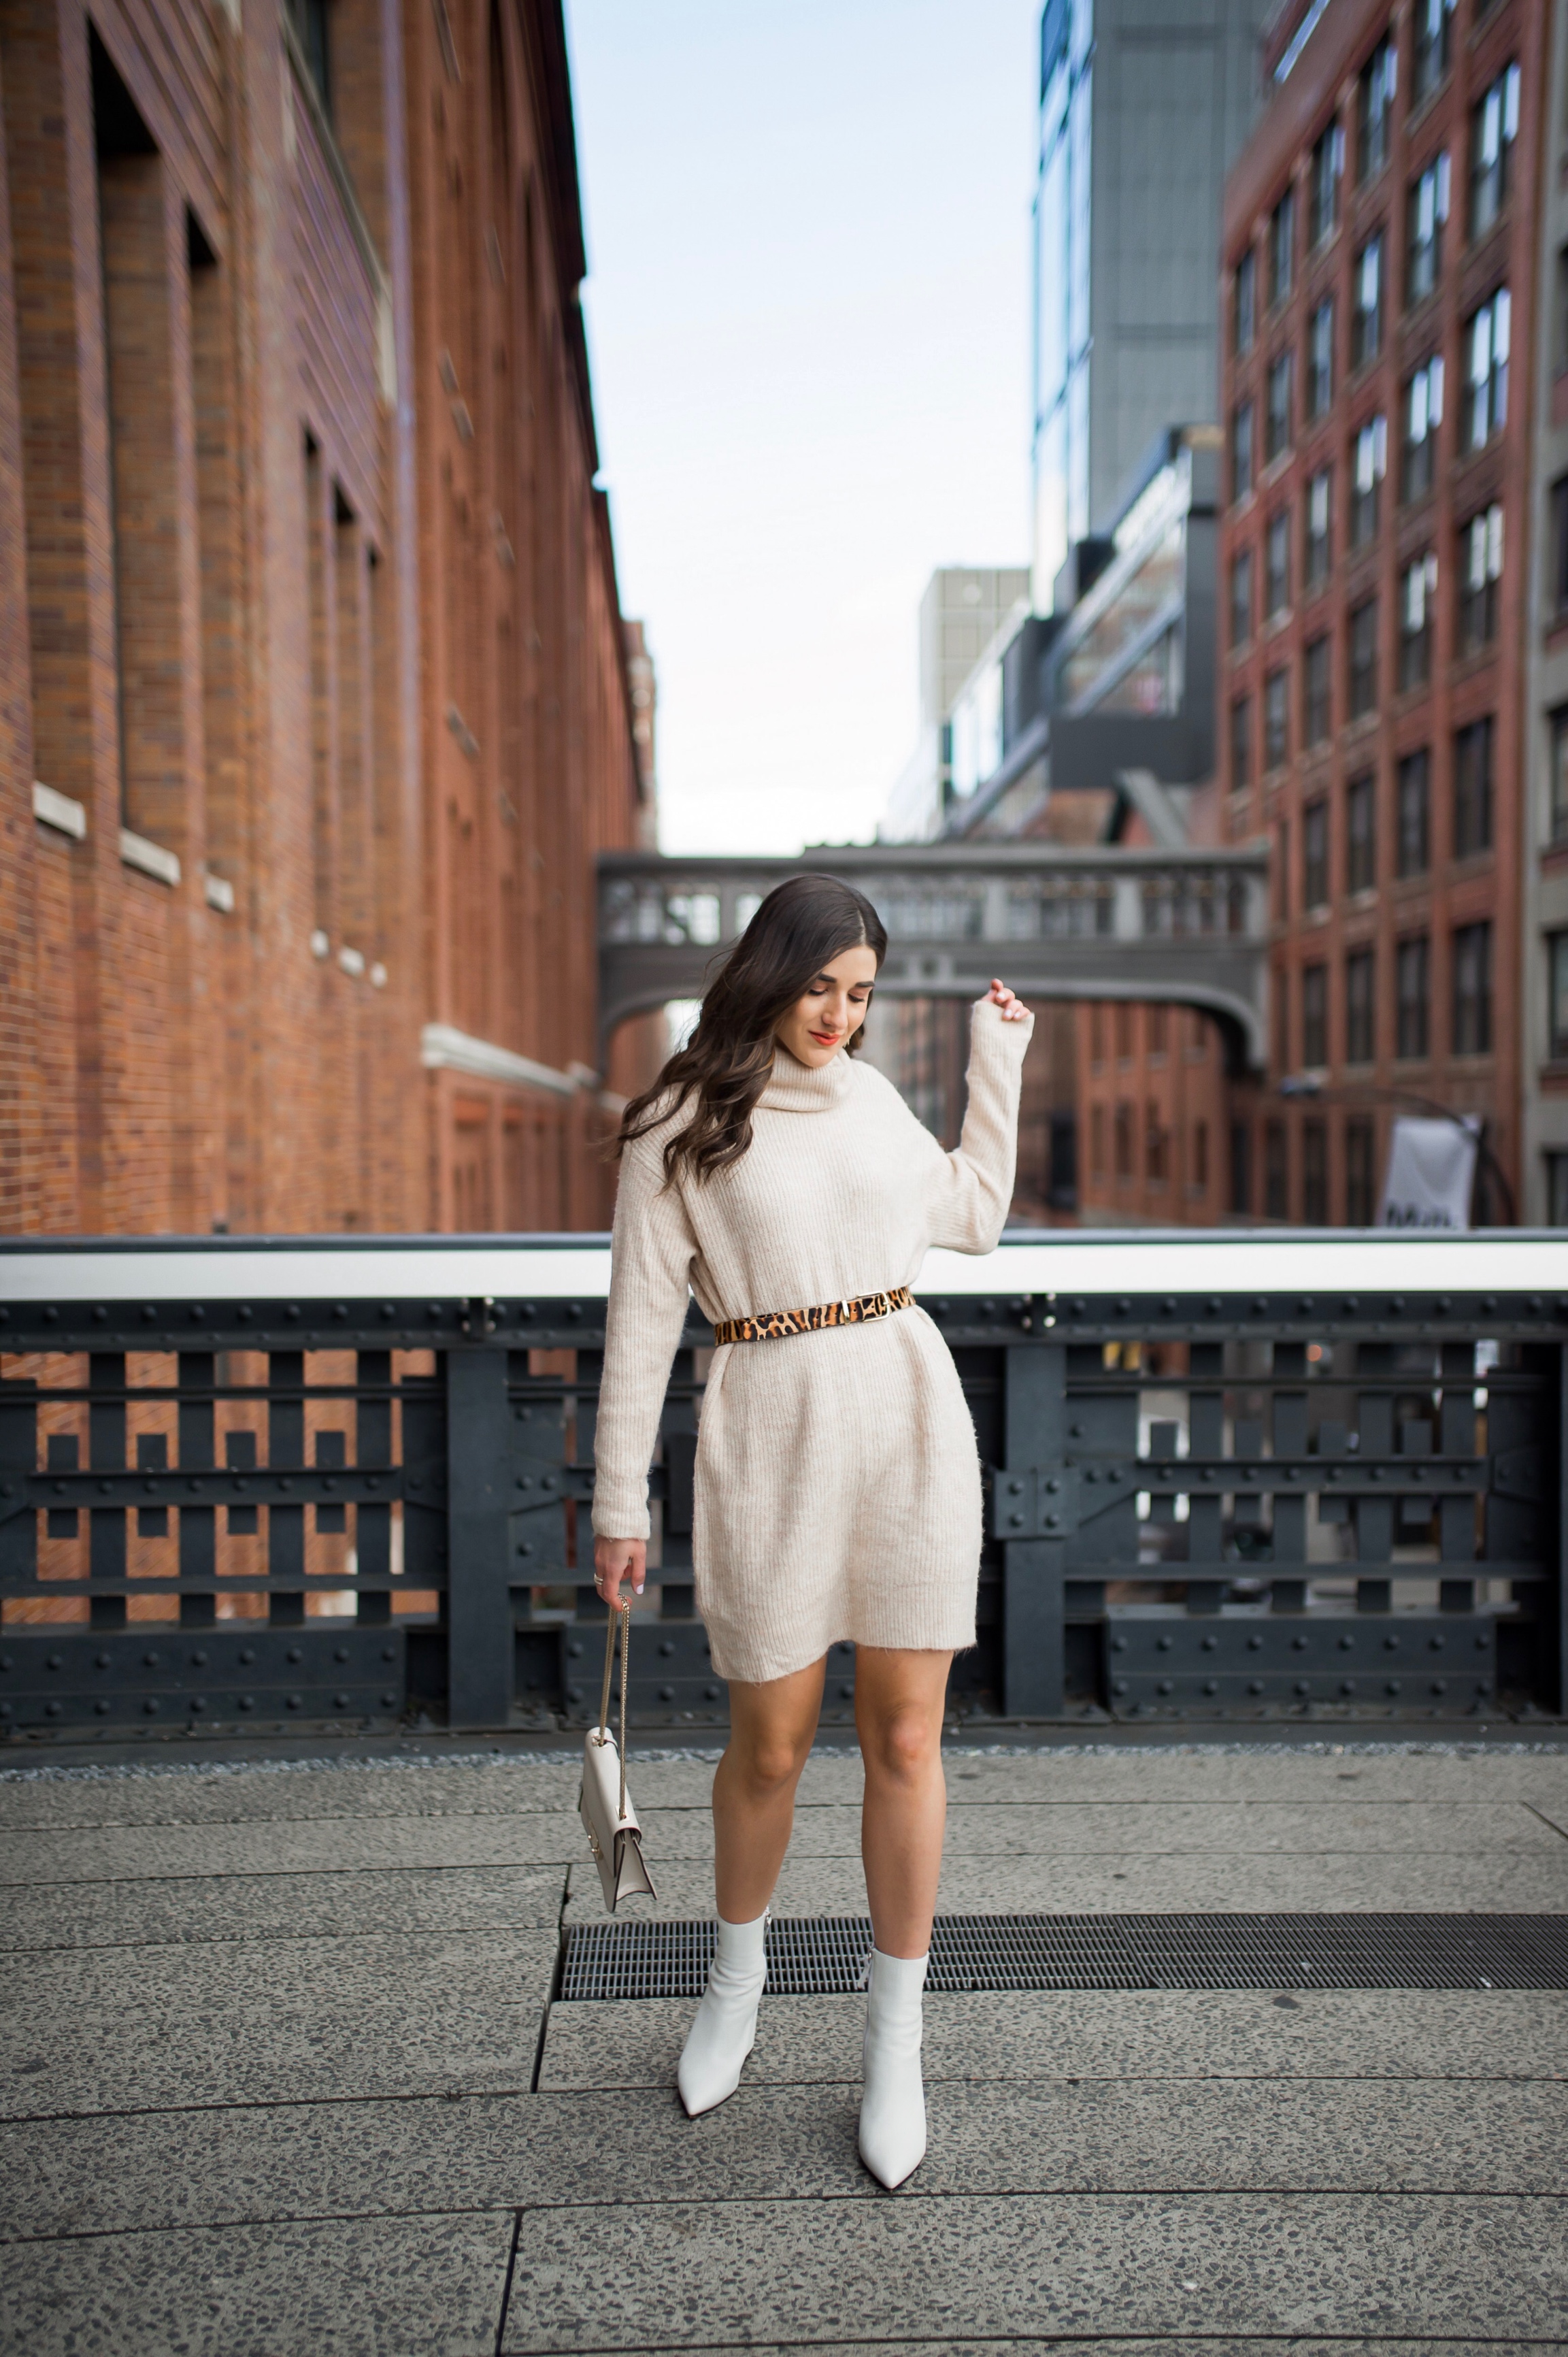 Why Blogging Is Far From Freeloading Beige Sweater Dress White Booties Esther Santer Fashion Blog NYC Street Style Blogger Outfit OOTD Trendy Shopping Leopard Belt Neutral Winter How To Wear Shop Sale Mango Jcrew Inspiration  The High Line Photoshoot.jpg